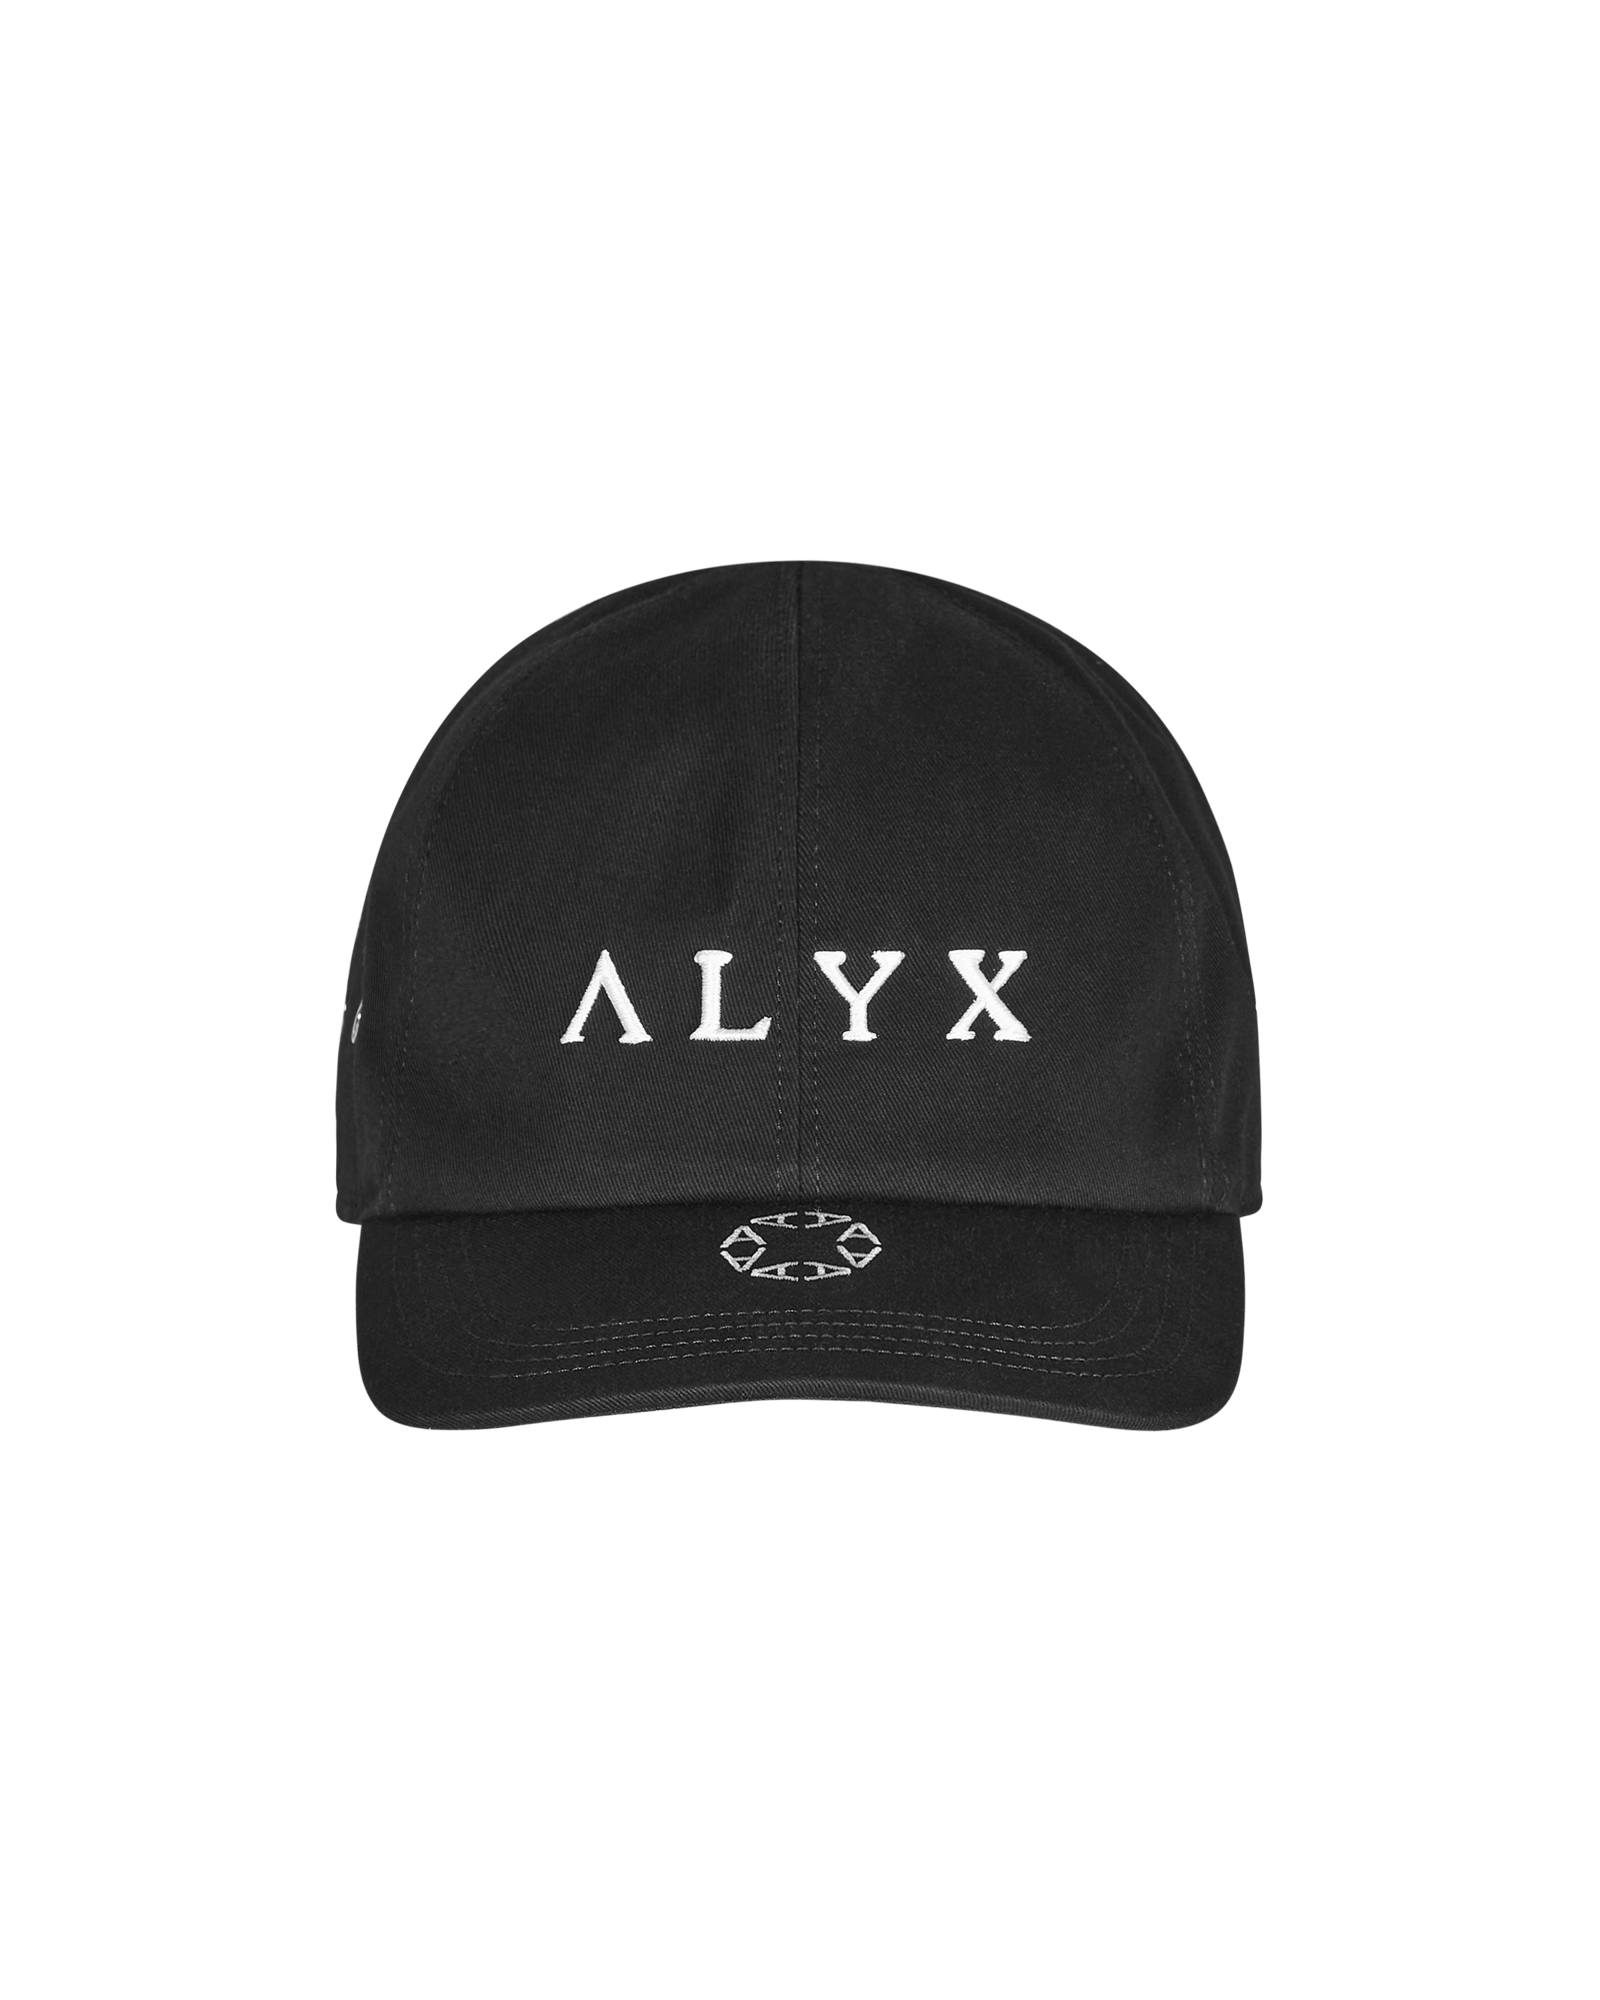 COTTON HAT WITH LOGO EMBROIDERED AND MONOGRAM